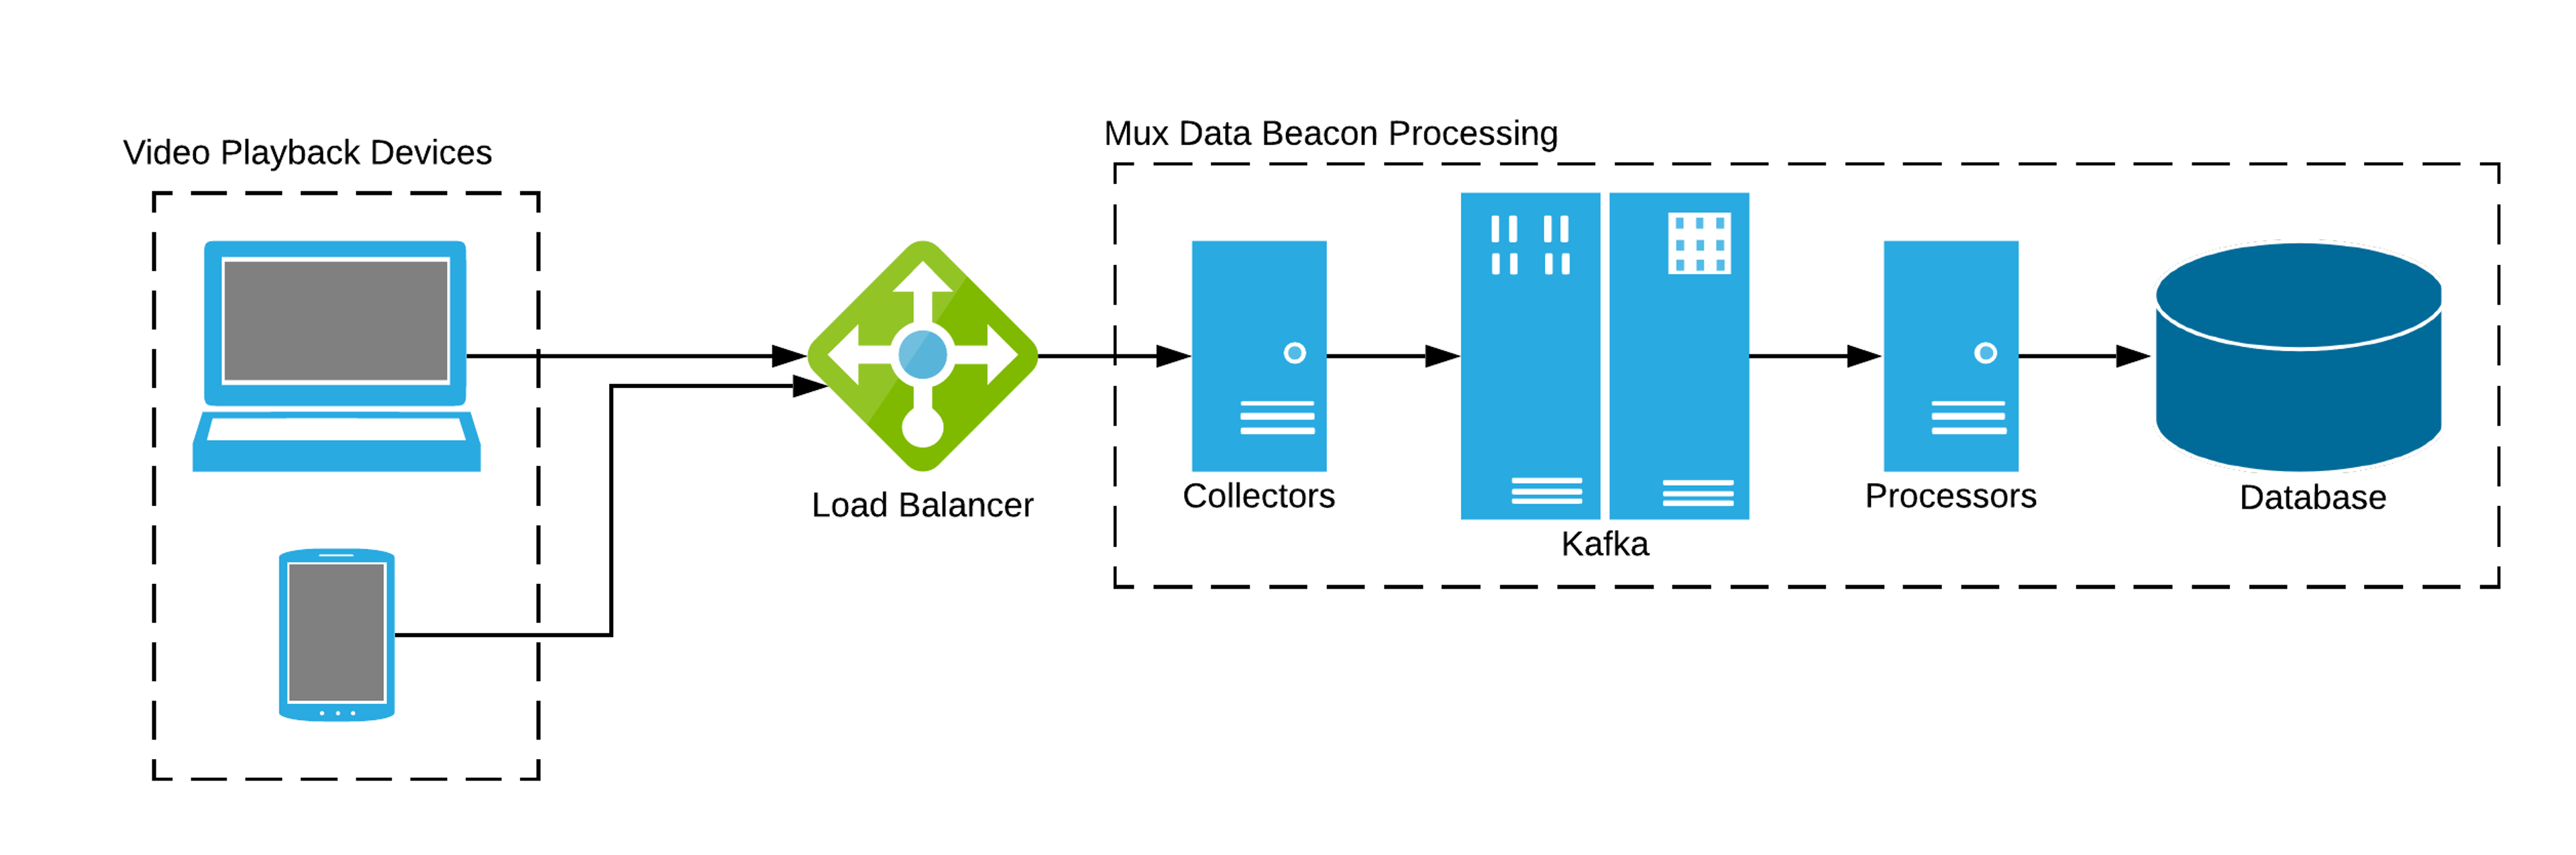 An image that shows how Mux Data Beacon processing is performed